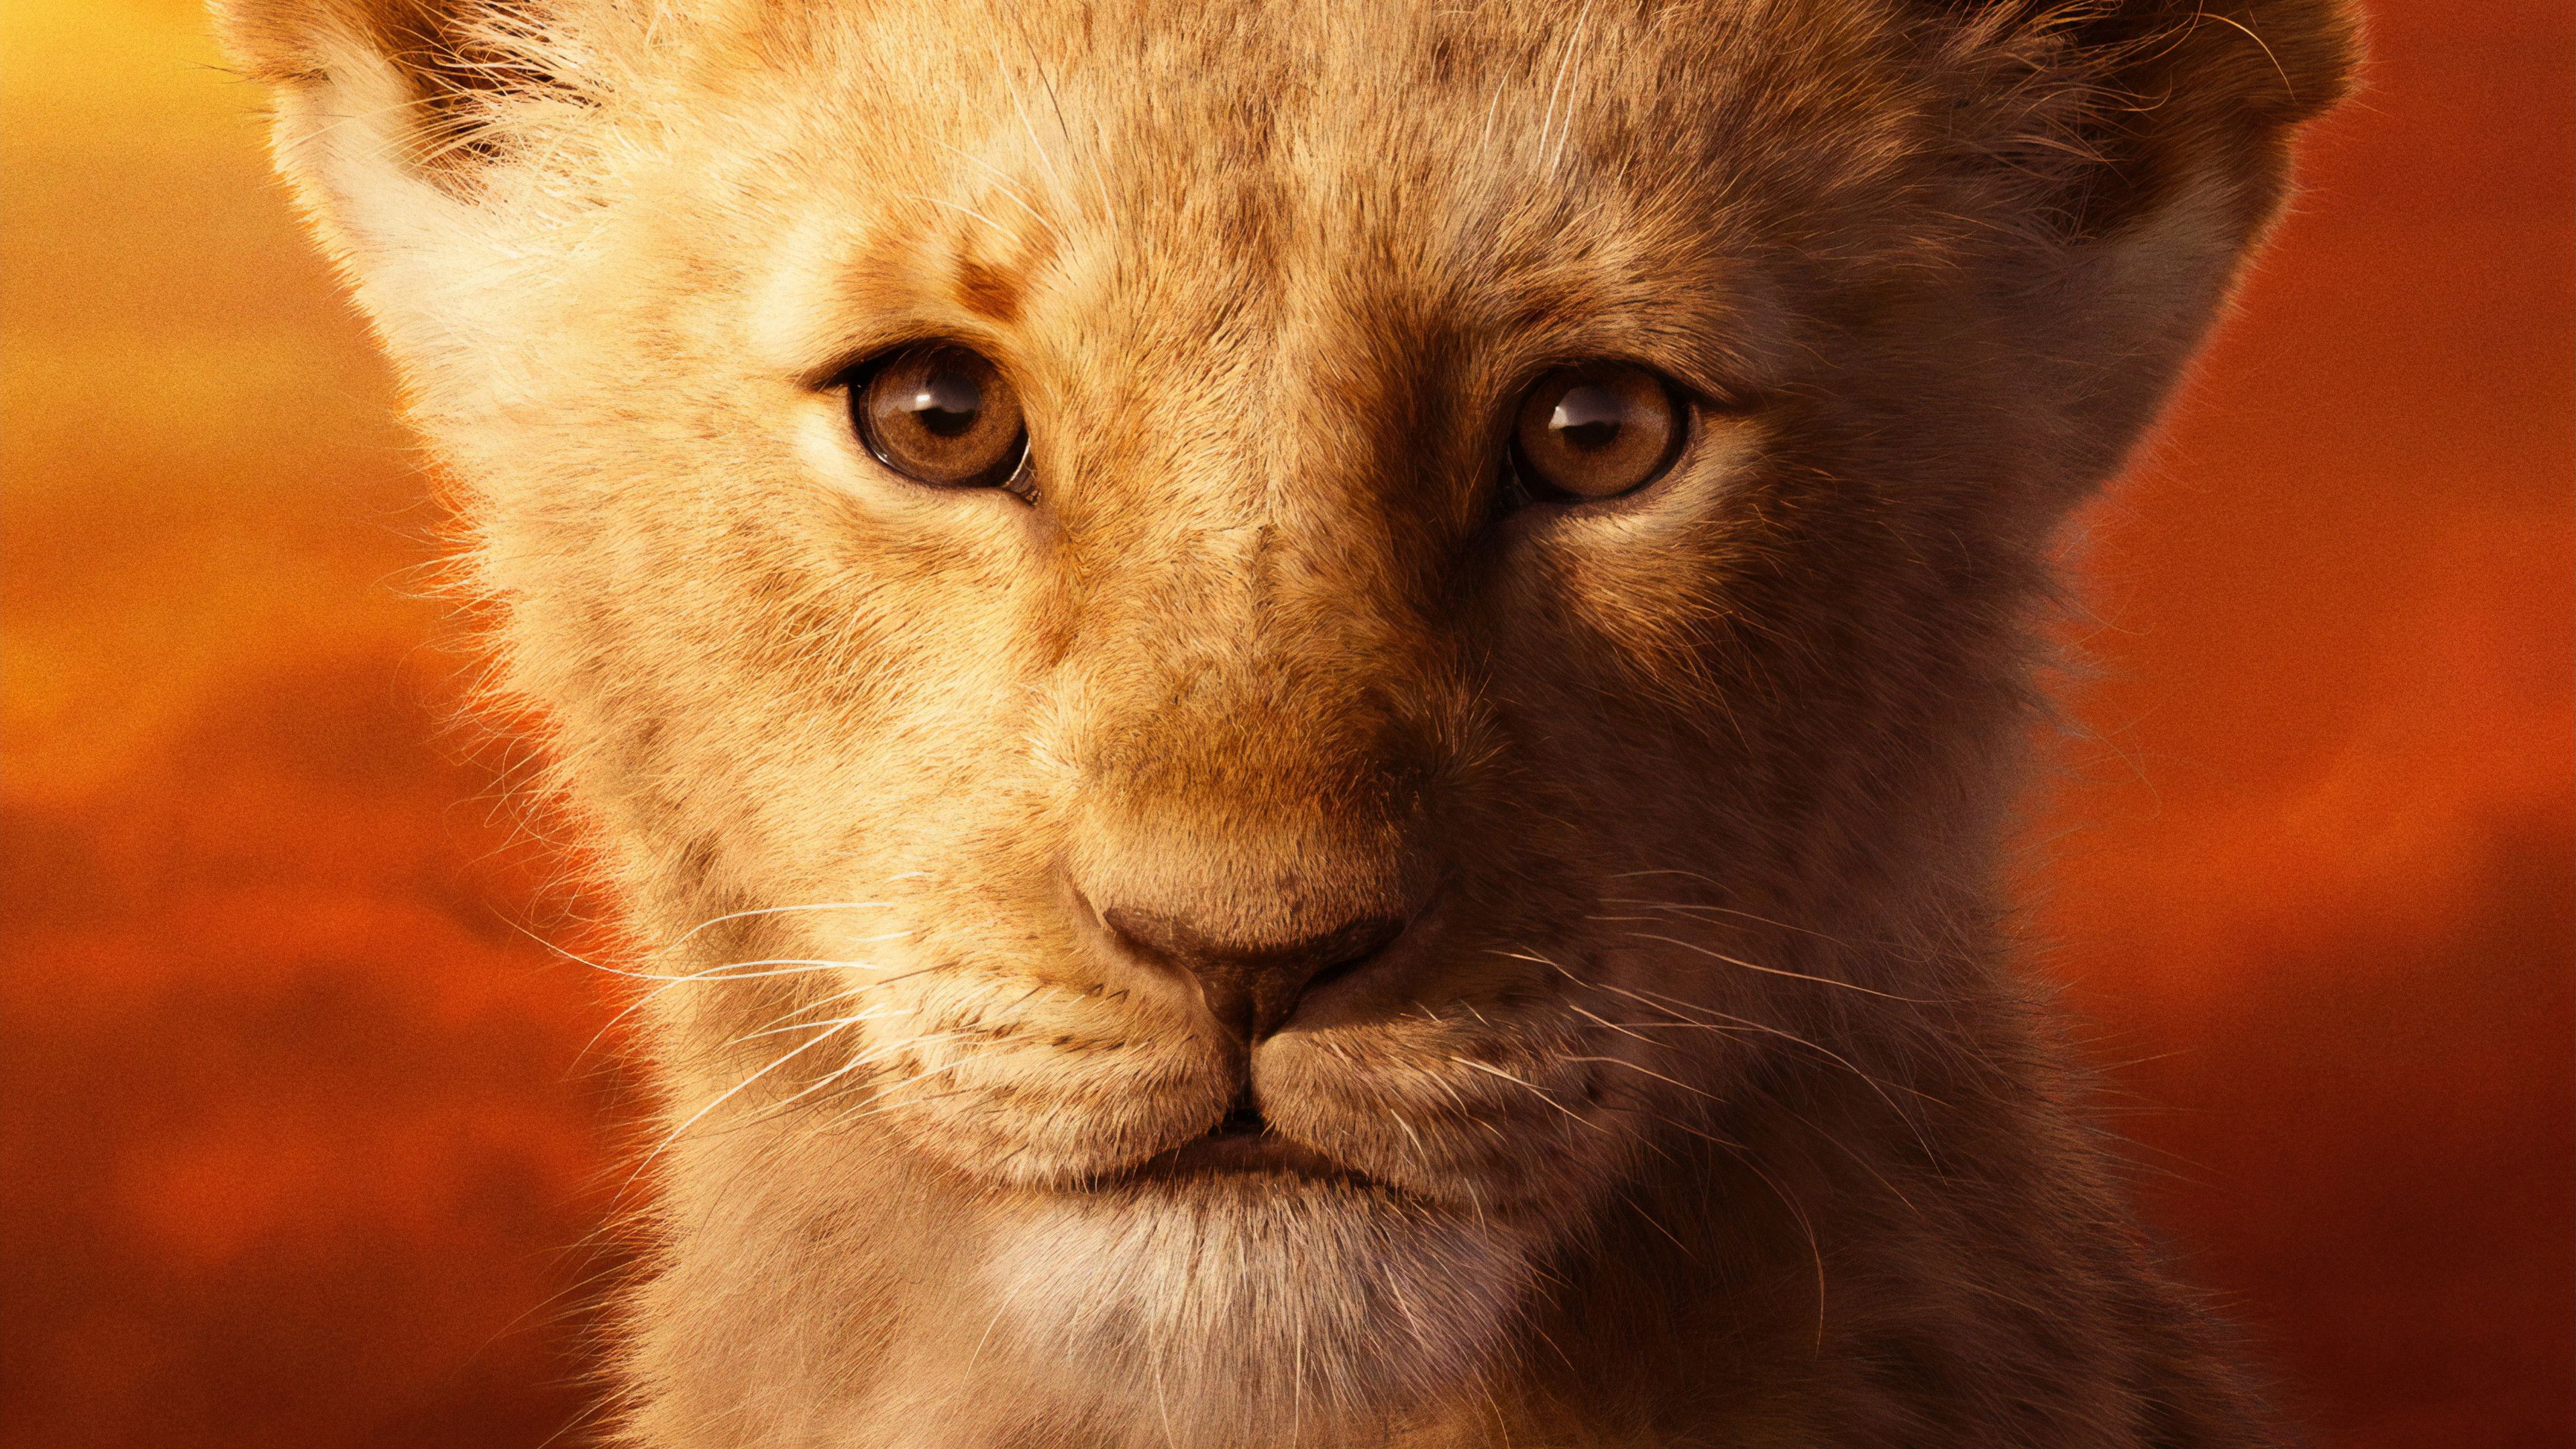 Lion King 4k Wallpapers - Wallpaper Cave